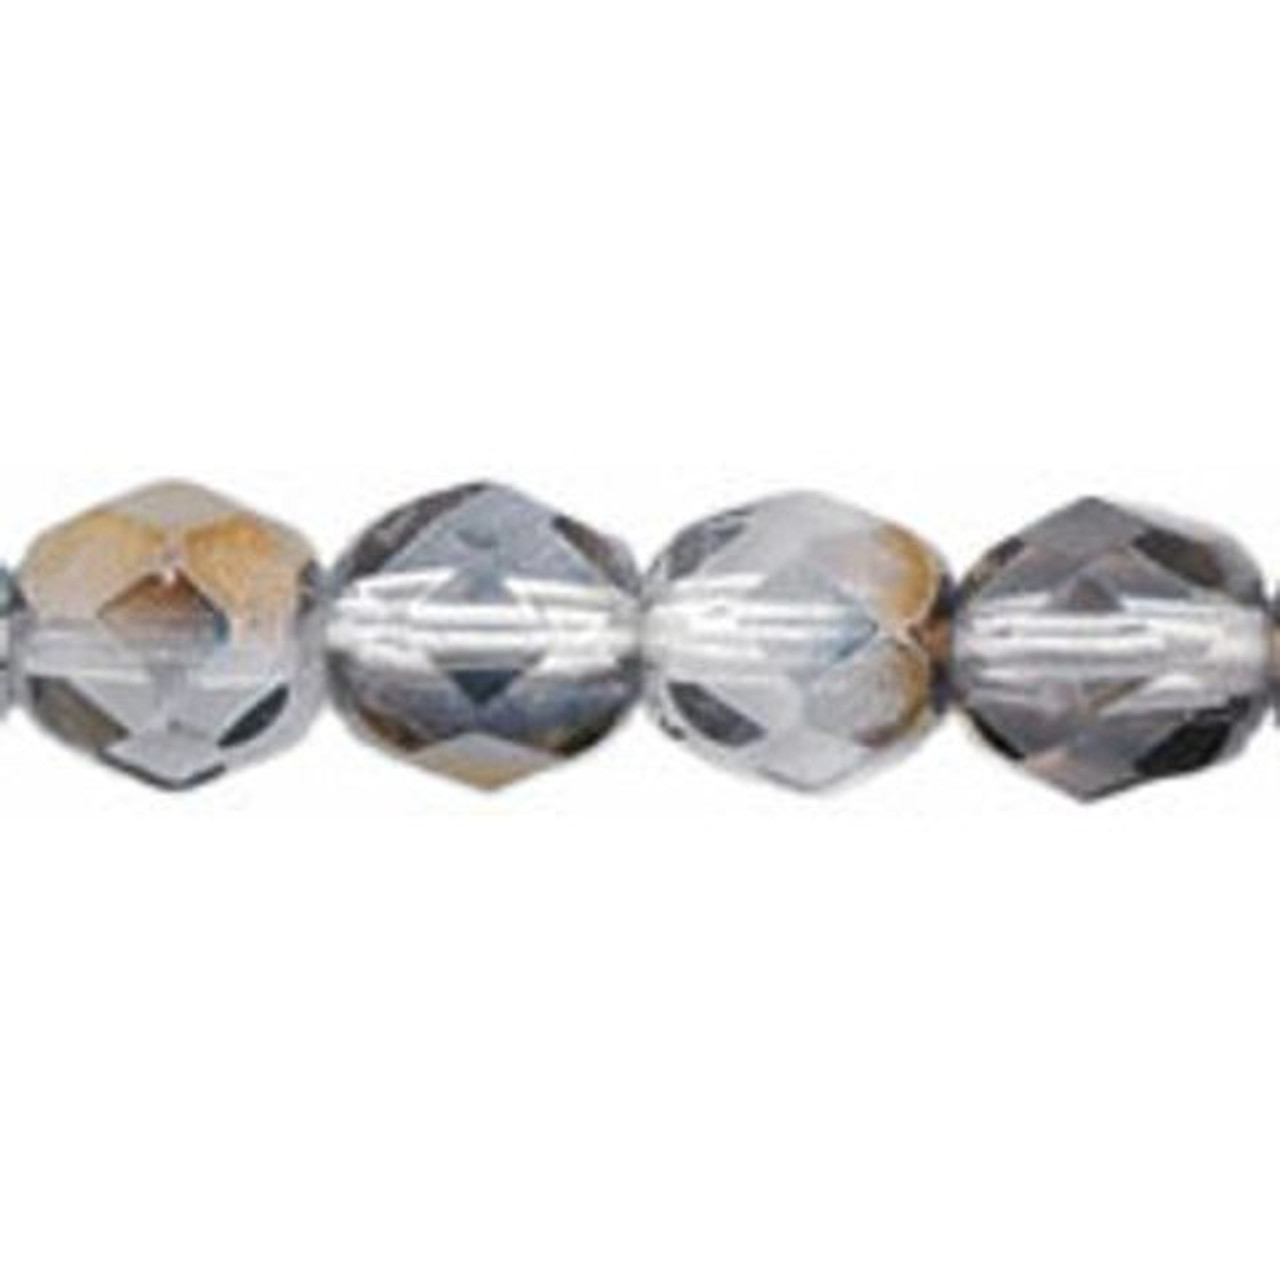 6mm Glass Beads - Bead Store - Wholesale beads - Jewelry supplies